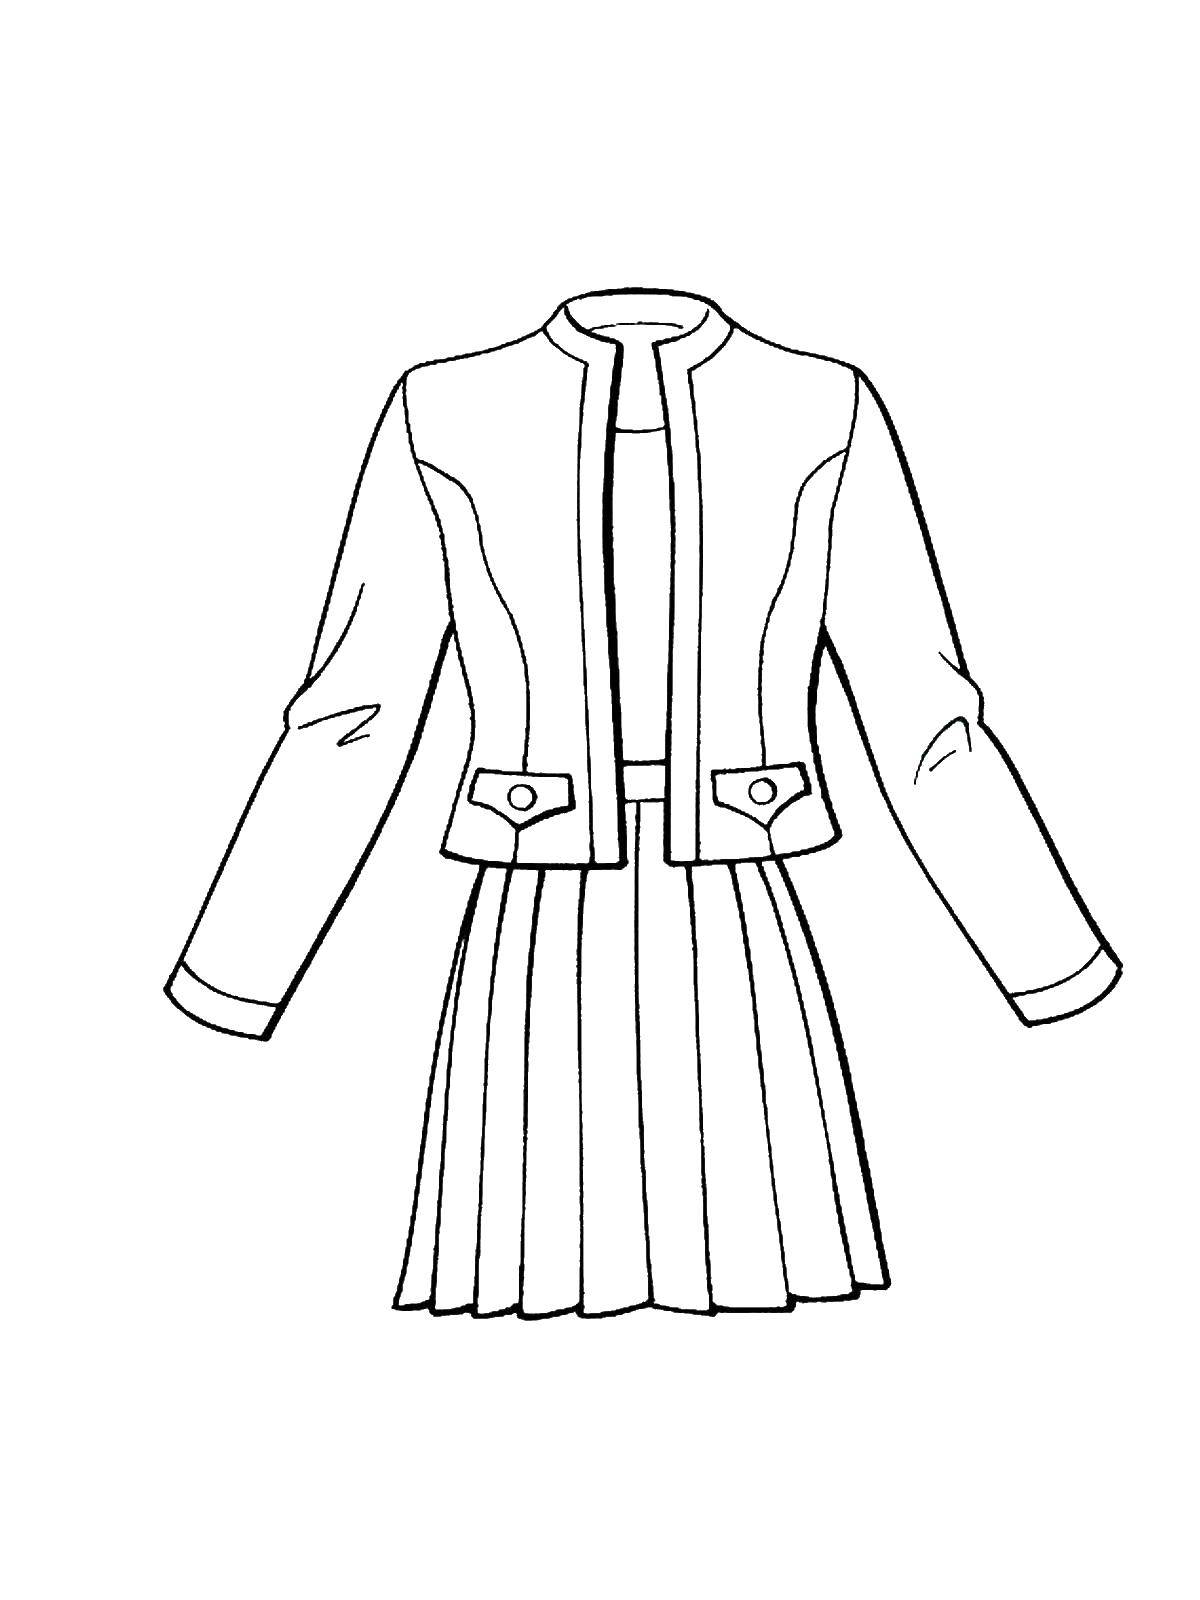 Coloring Dress with jacket. Category clothing. Tags:  Clothing, dress, jacket.